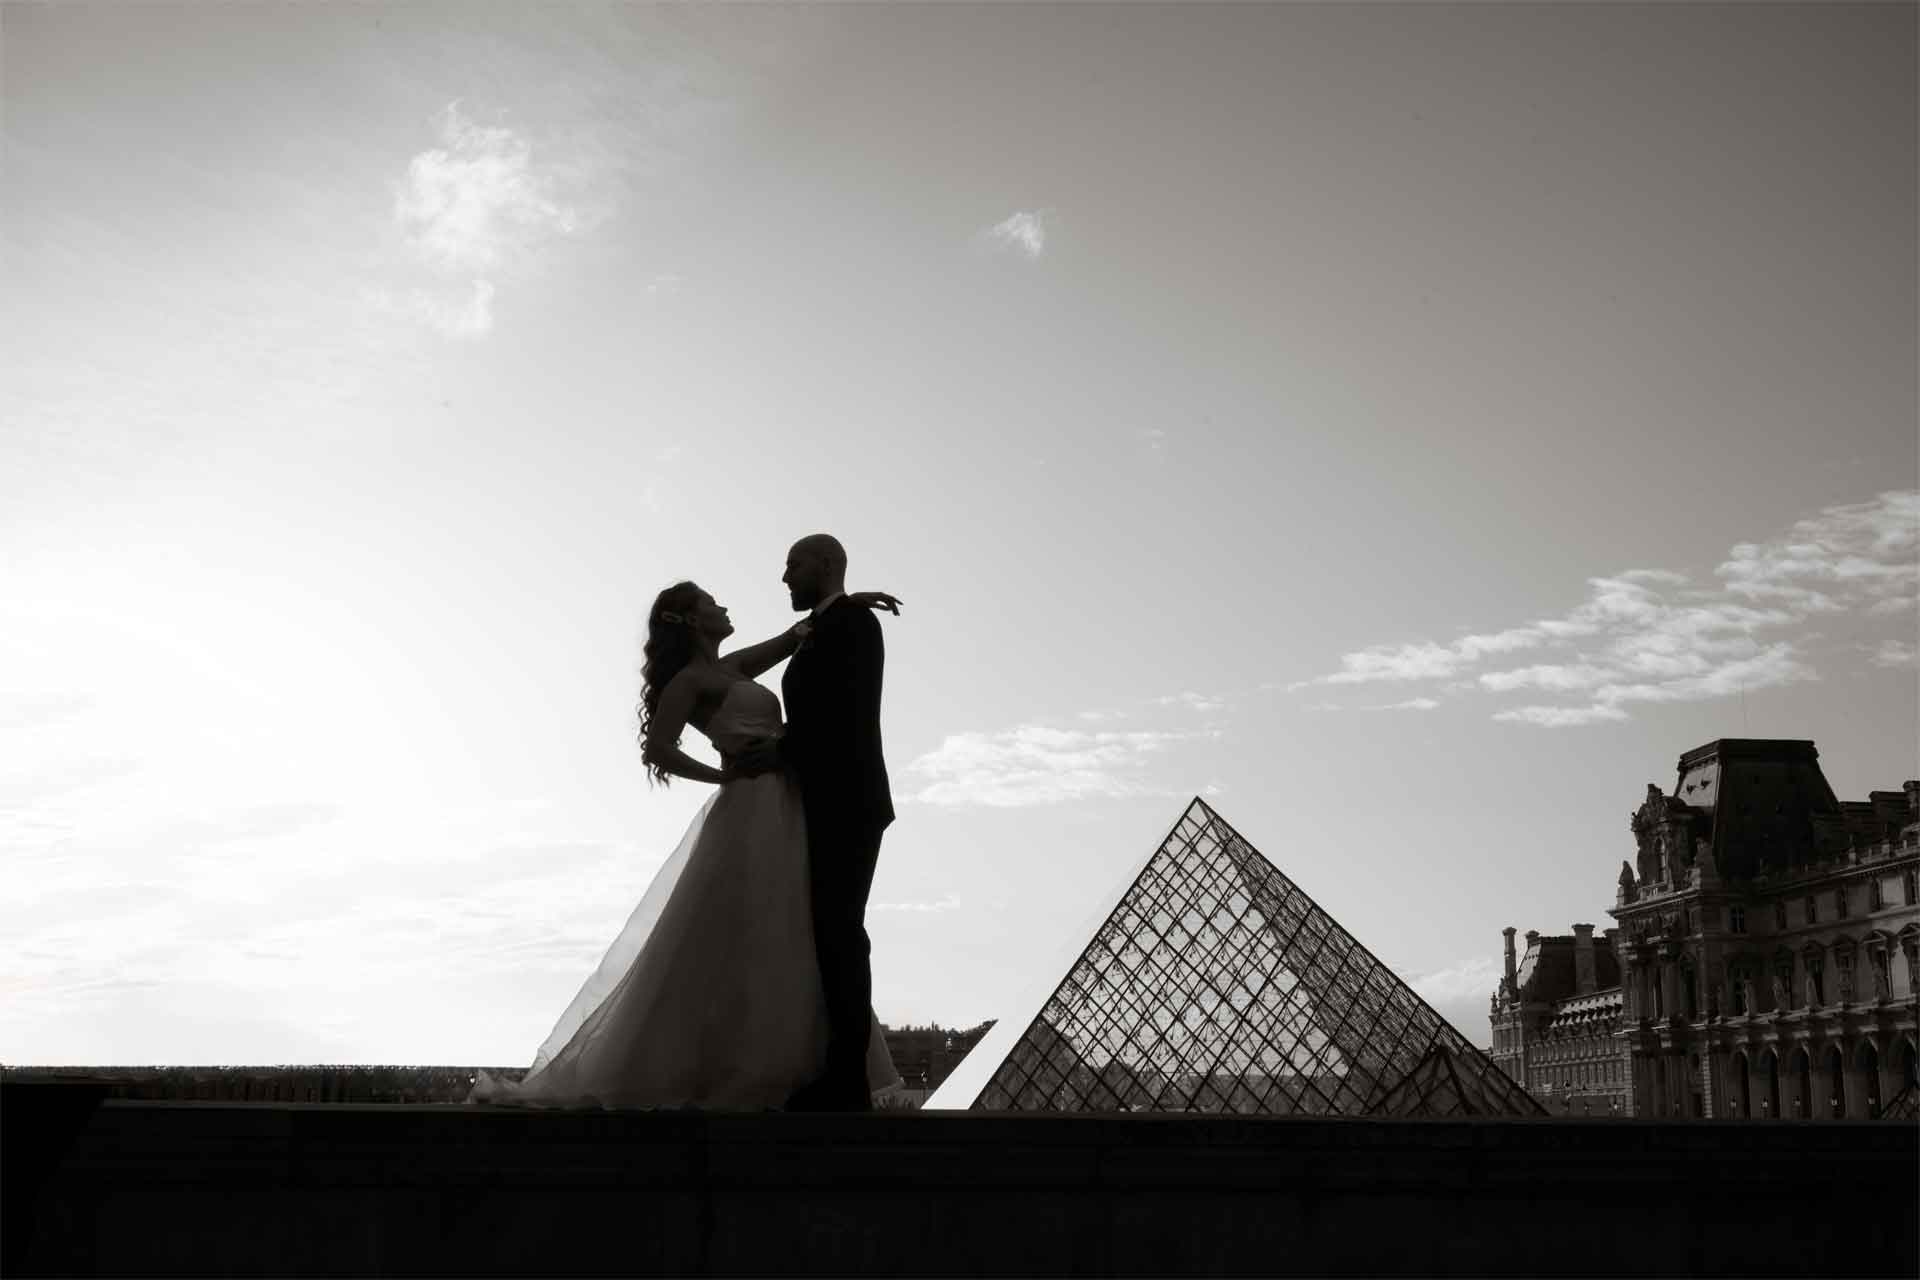 photo shoot at the Louvre in Paris